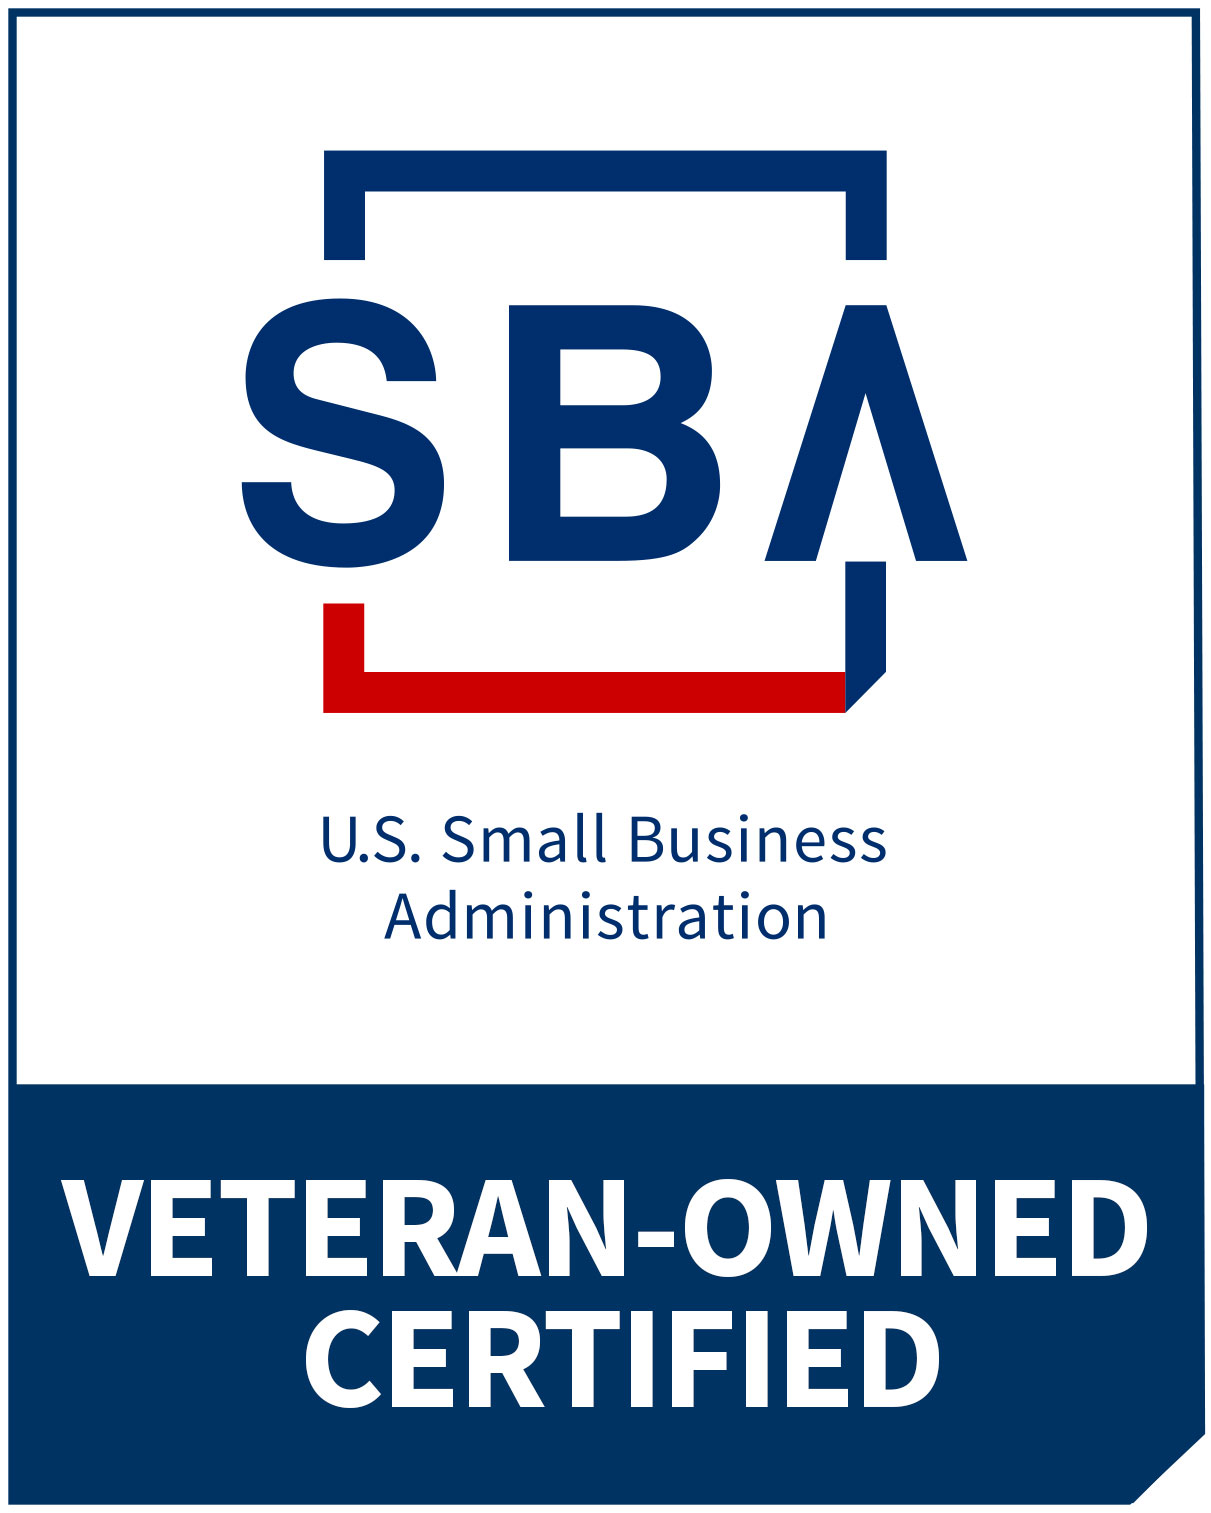 Art of Frozen Time is a SBA-certified Veteran-Owned Small Business (VOSB)